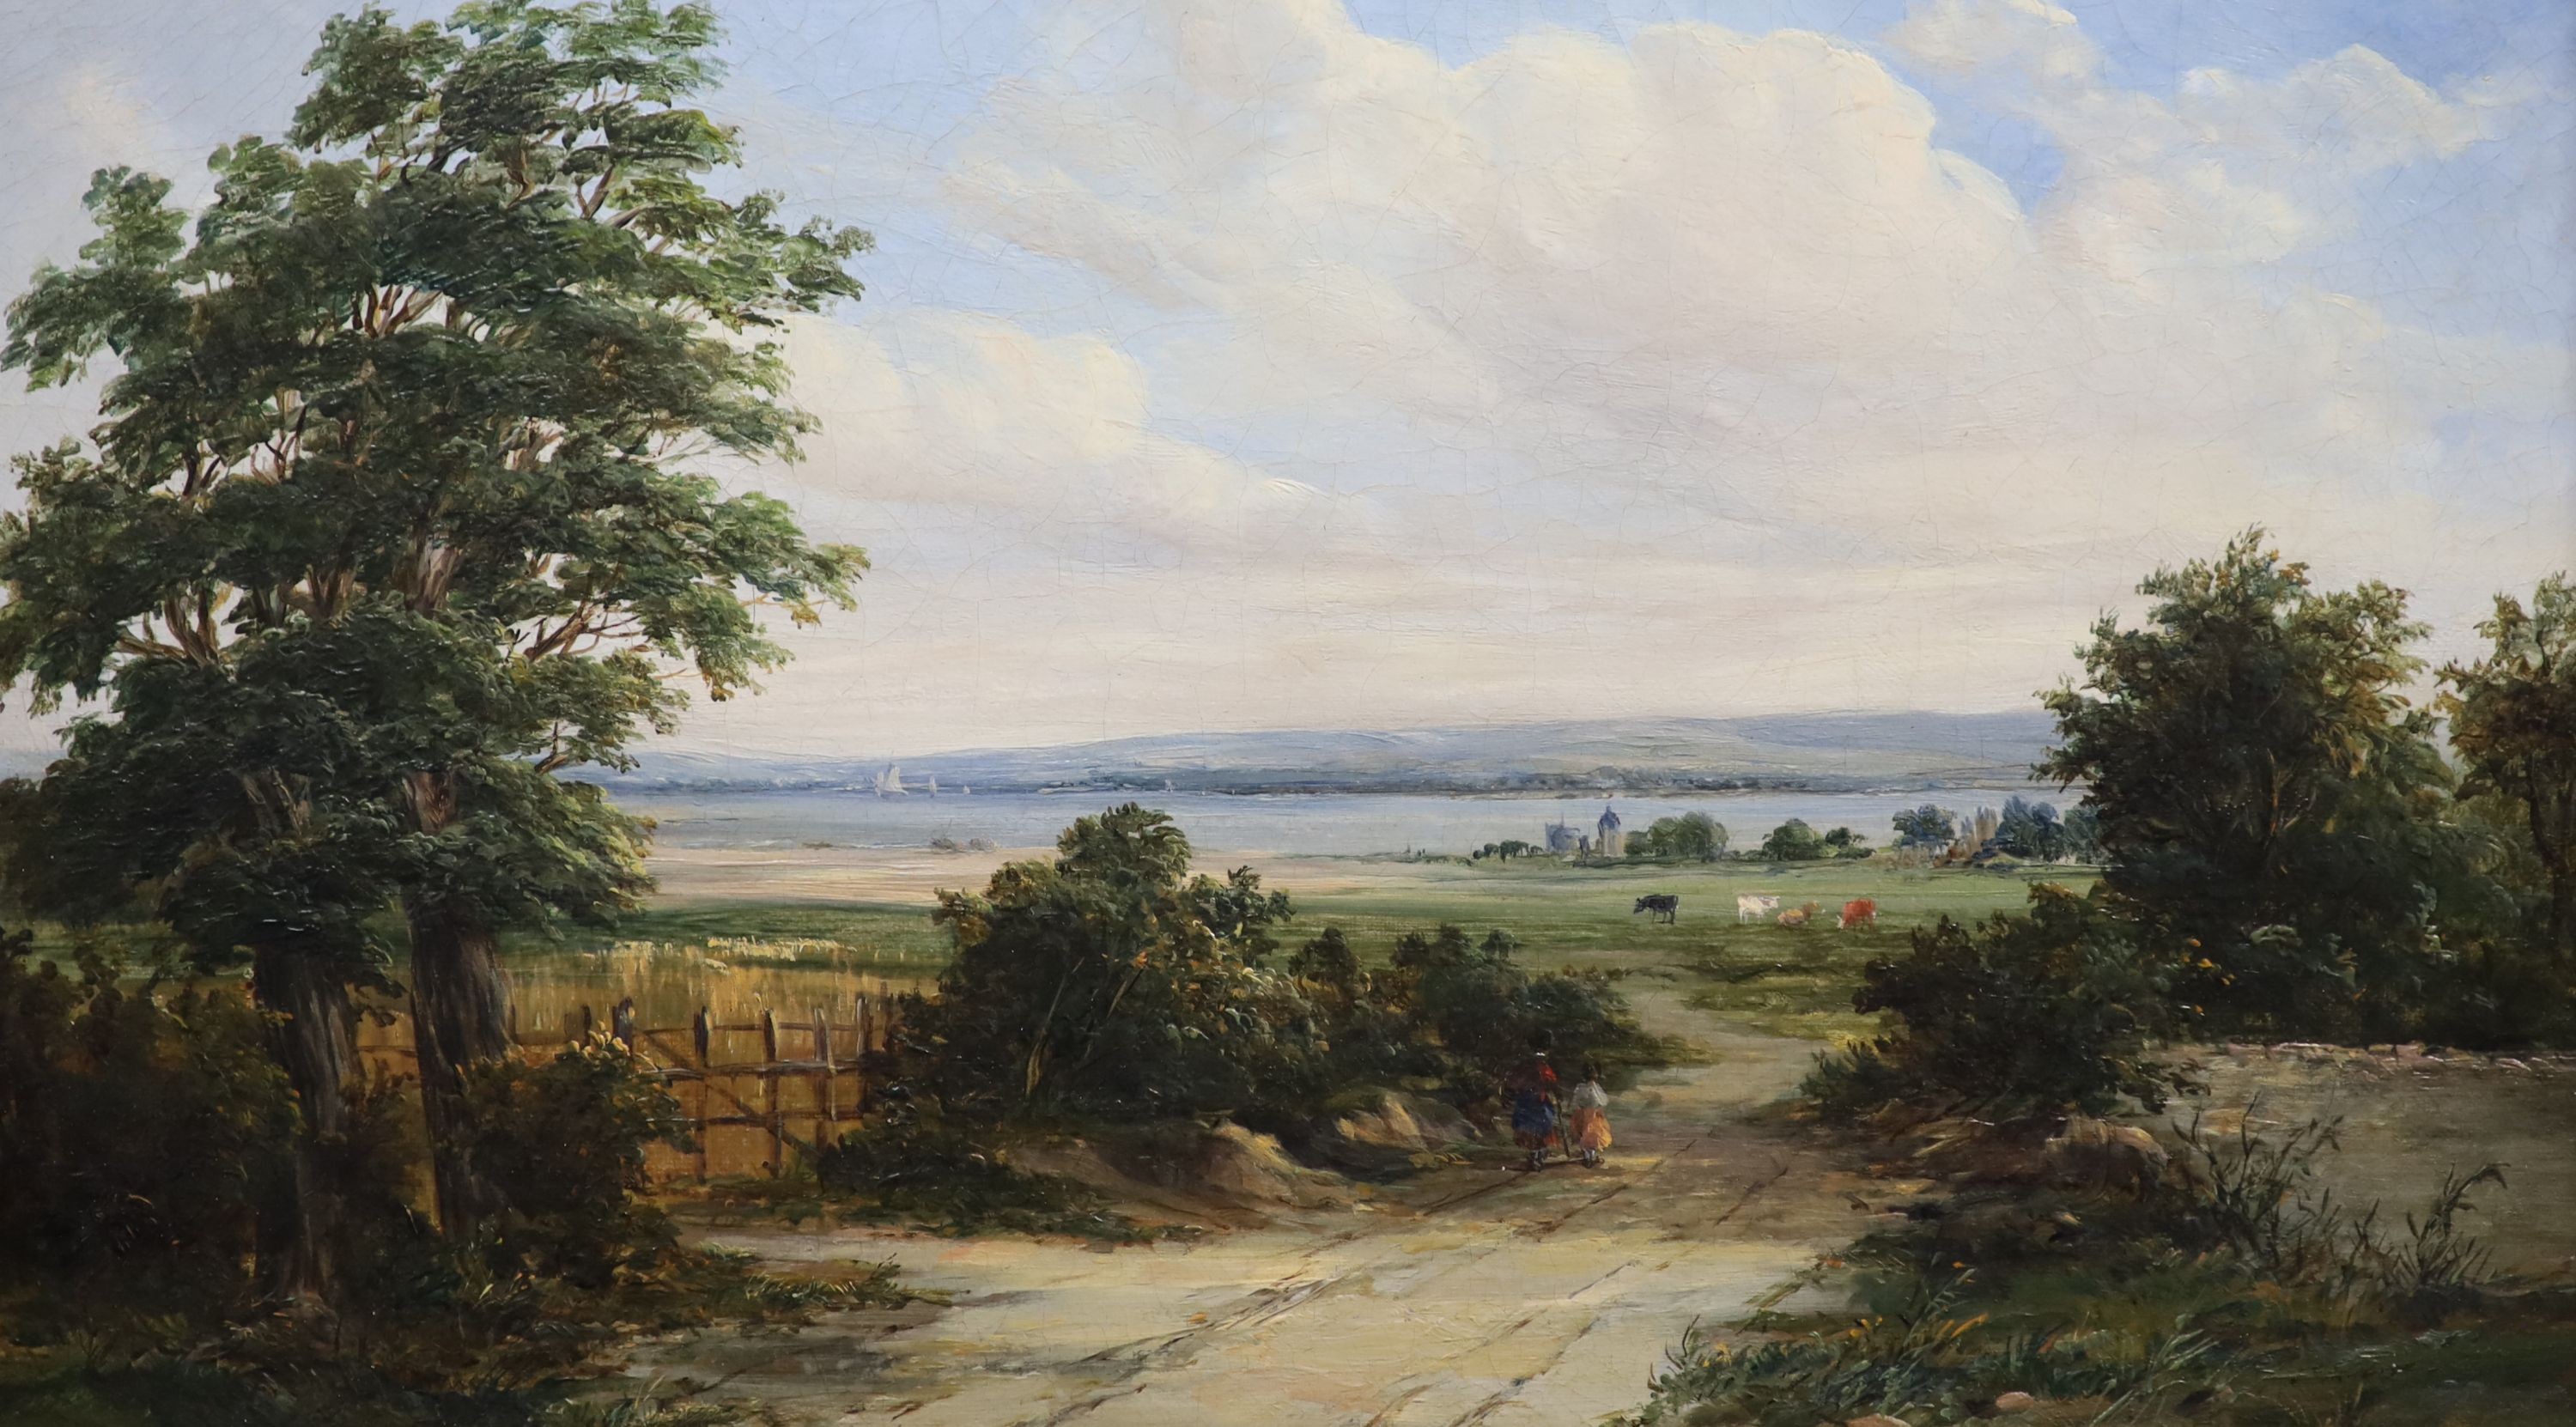 Alfred Vickers (1786-1868), Extensive landscape with figures on a lane looking towards an estuary, oil on canvas, 22 x 37cm